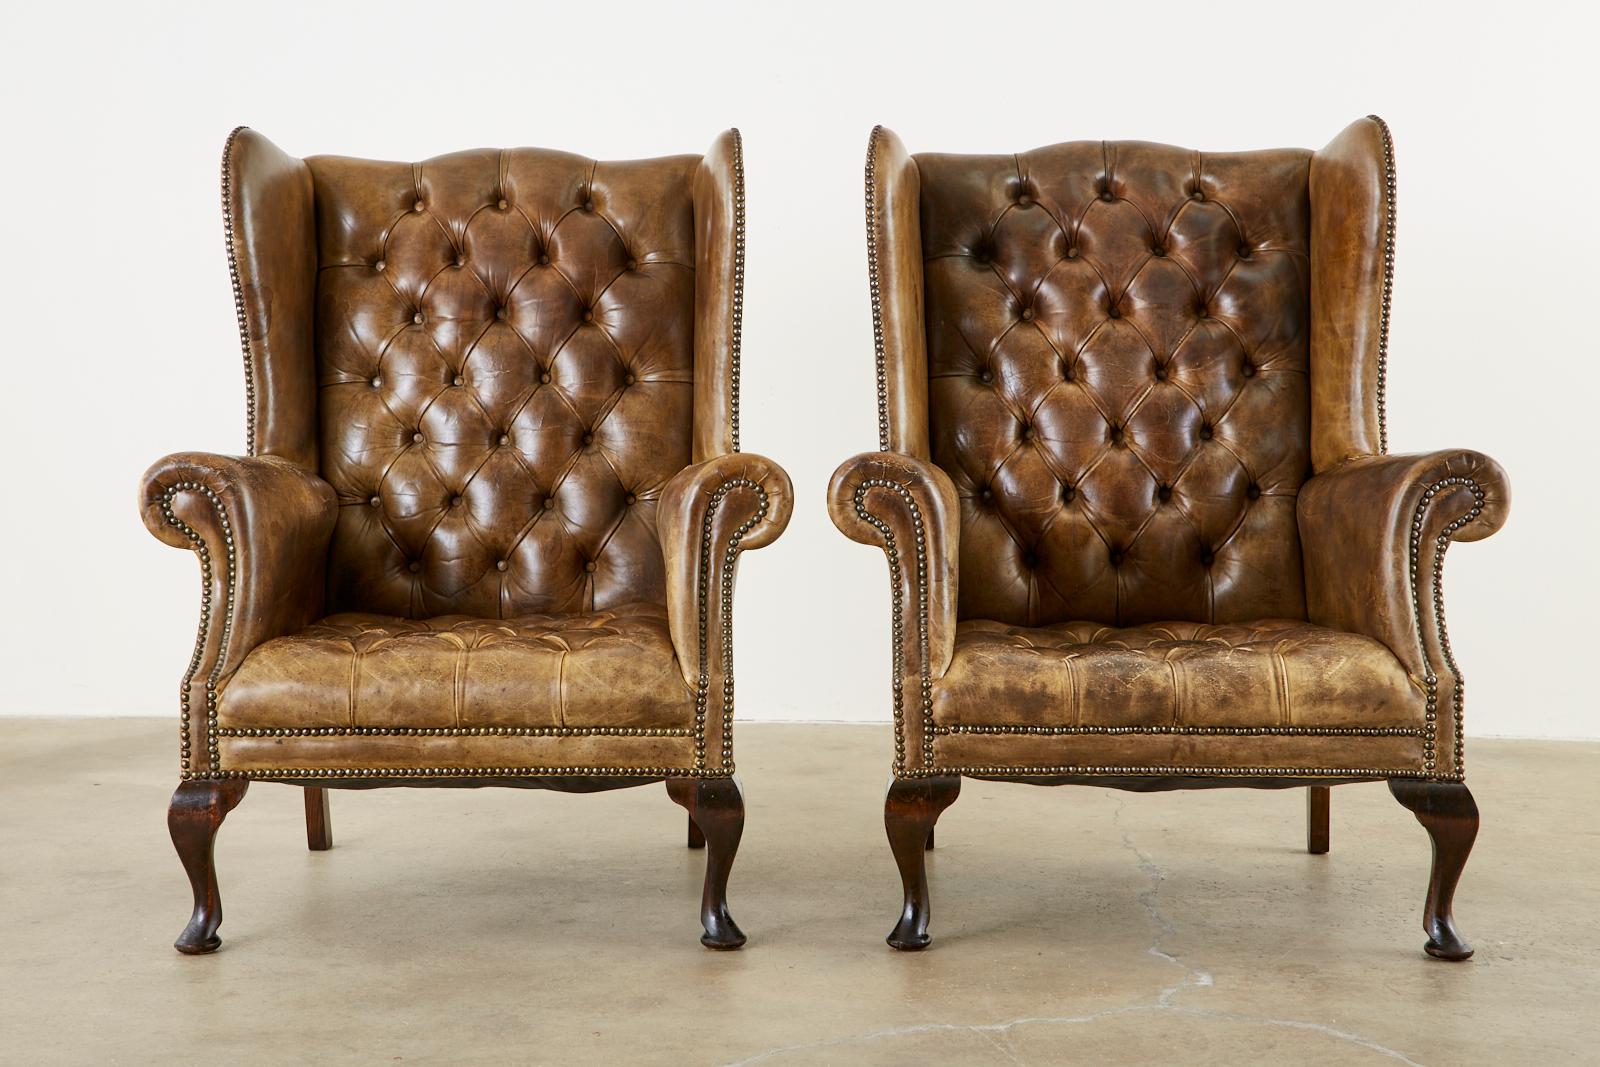 Matched set of 19th century English wingback library armchairs. Featuring a well aged cigar leather tufted upholstery. Handcrafted from hardwood mahogany frames. The chairs weight approximate 55 pounds each and are decorated with brass tack